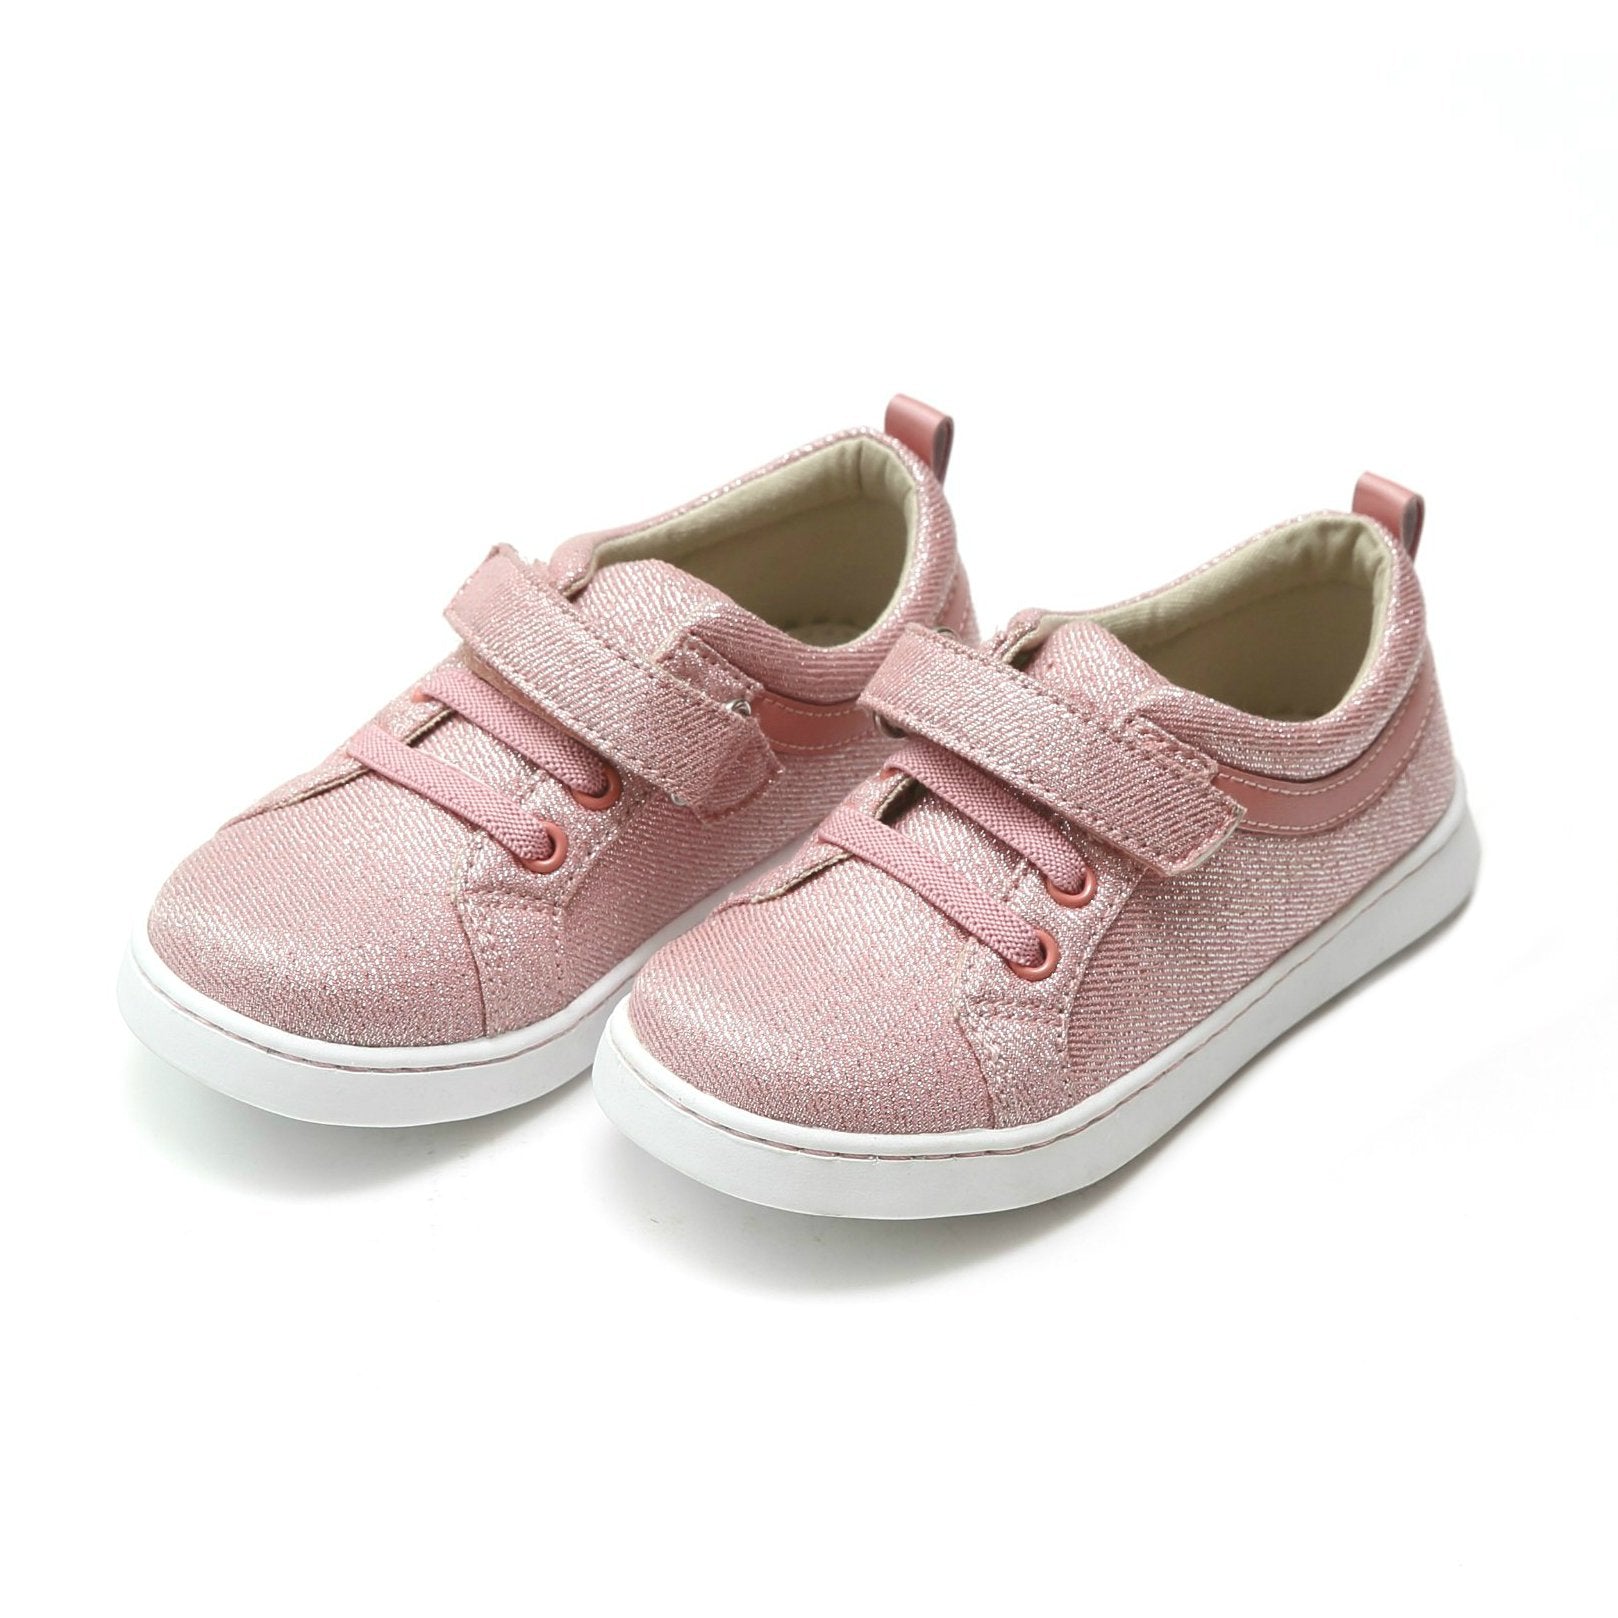 Amorous kugle bue L'Amour Girls Natalie Metallic Playground Sneaker – L'Amour Shoes